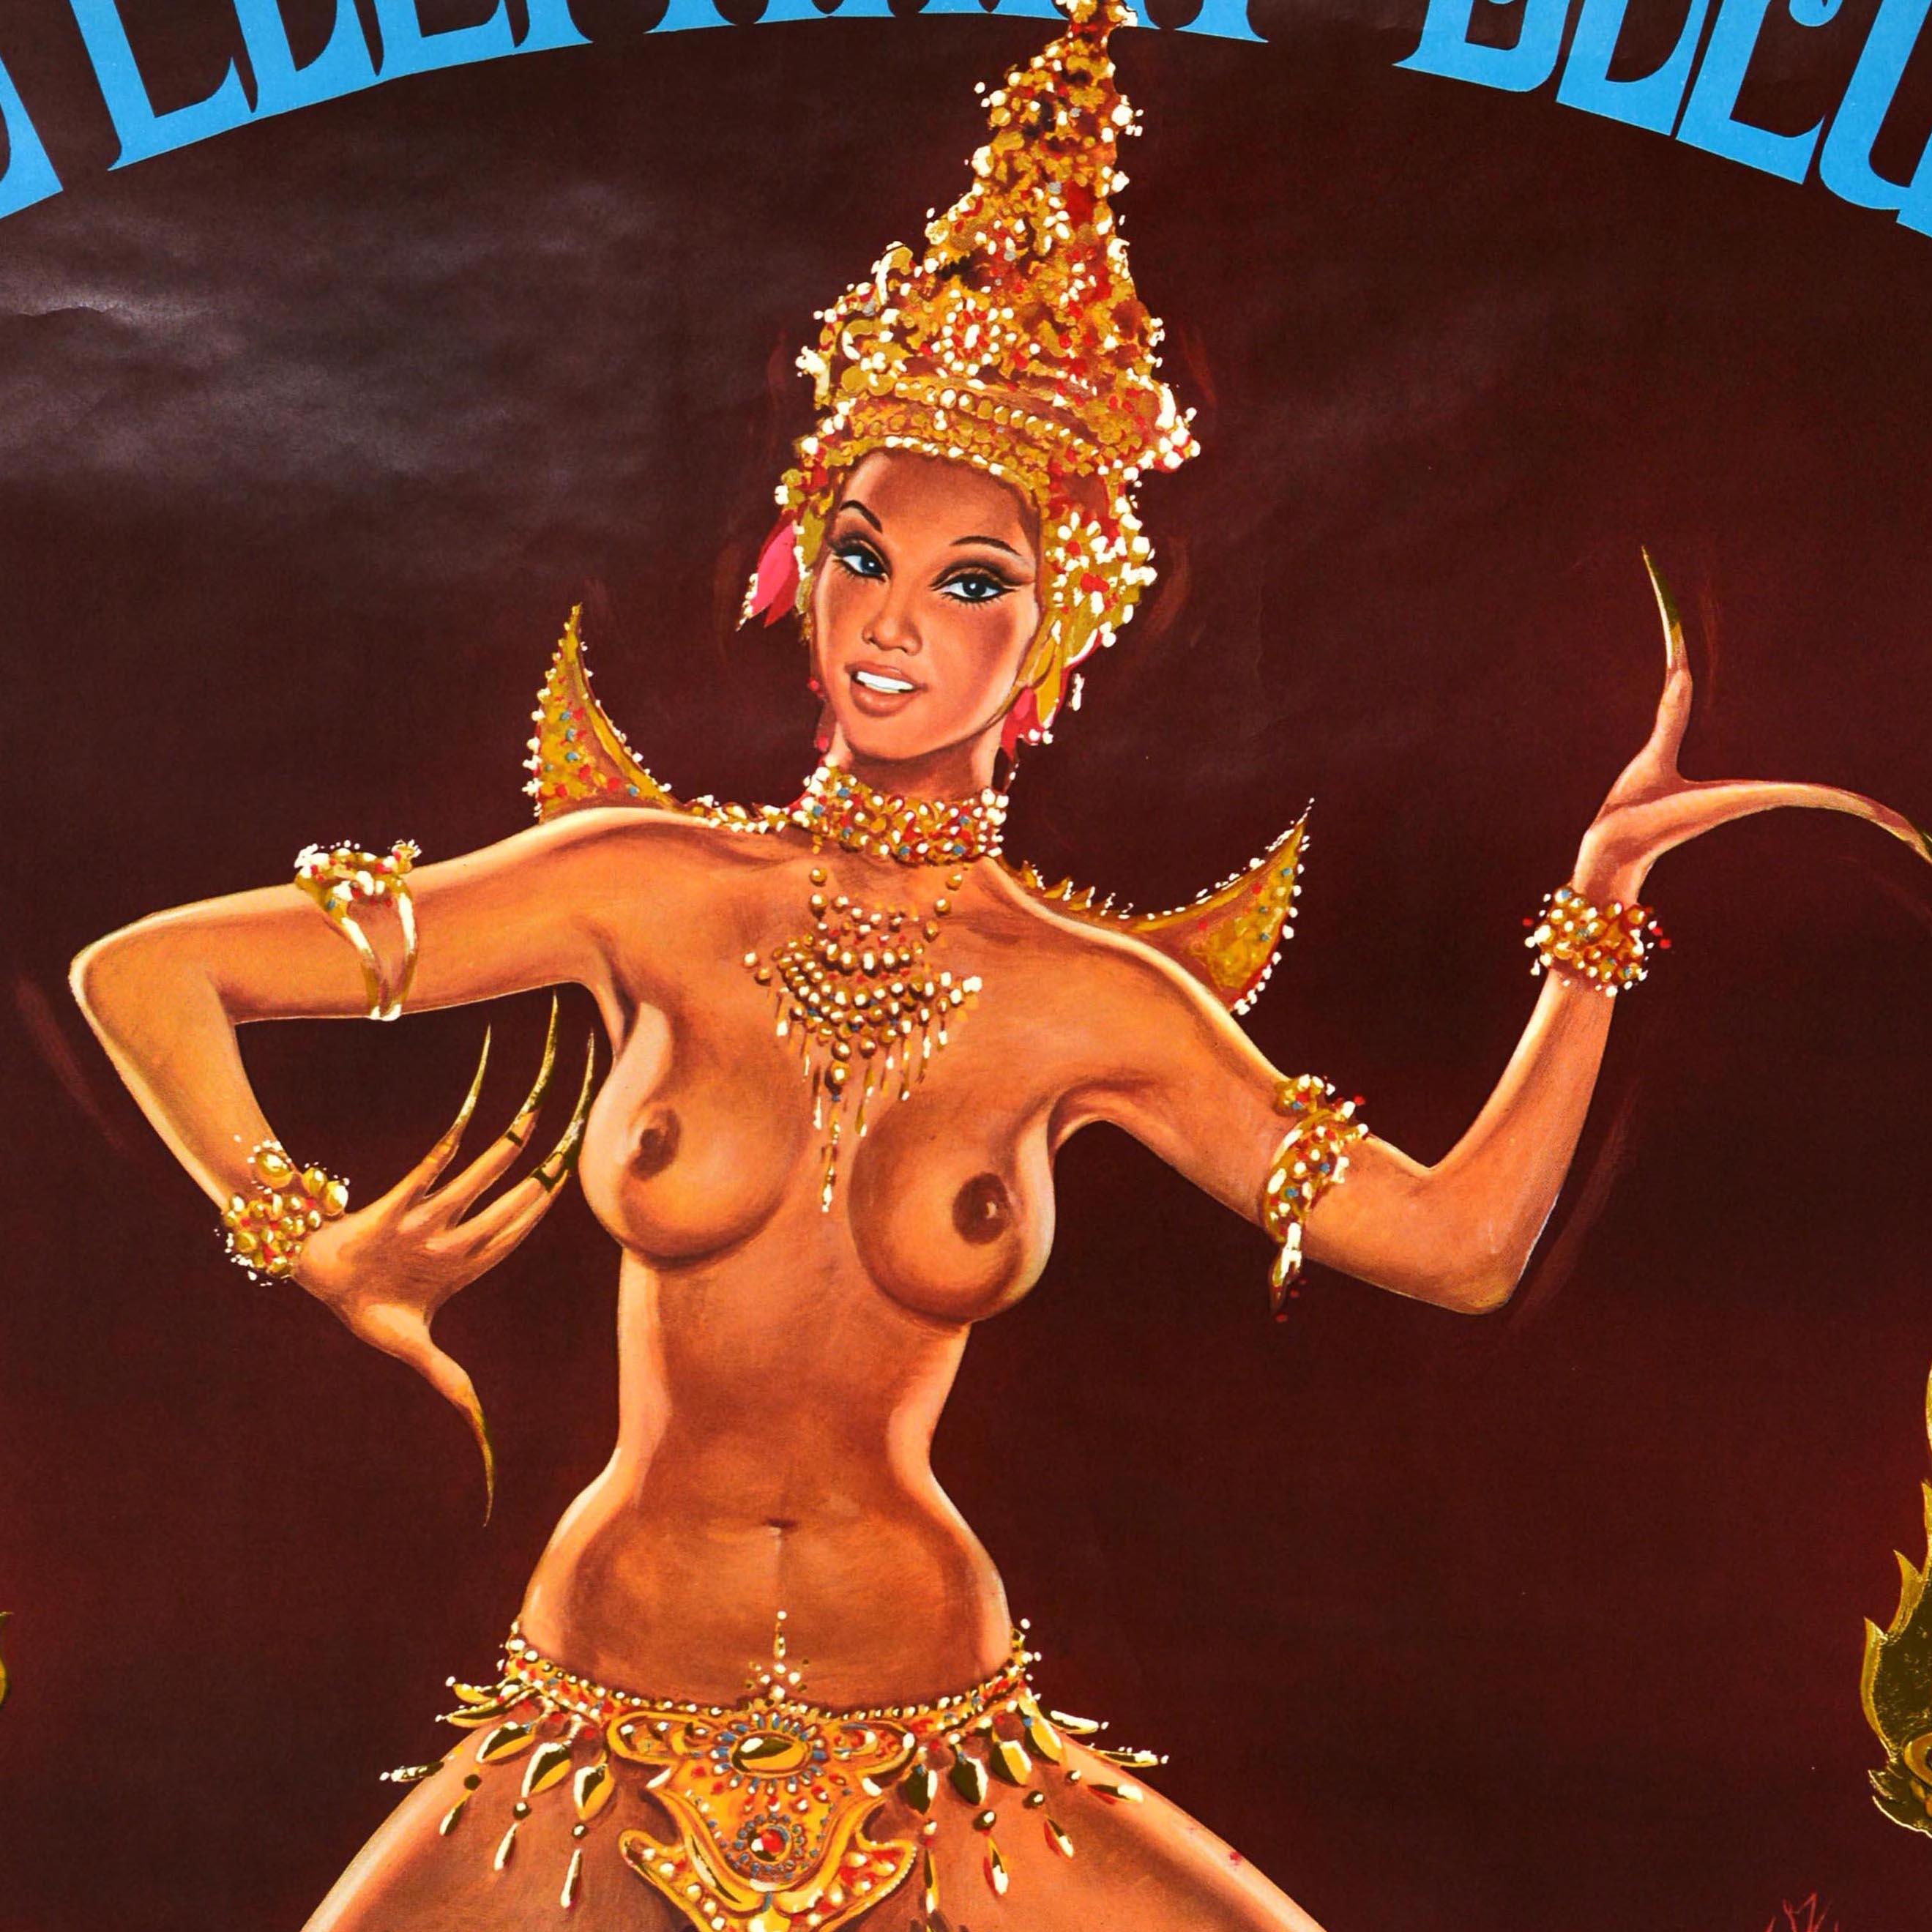 Original vintage poster advertising a Thai themed performance at the Blue Elephant / L'Elephant Bleu restaurant on the Champs Elysees in Paris produced by Jean-Claude Paulard and Thierry Delayen featuring pin-up style artwork by OKley (Pierre